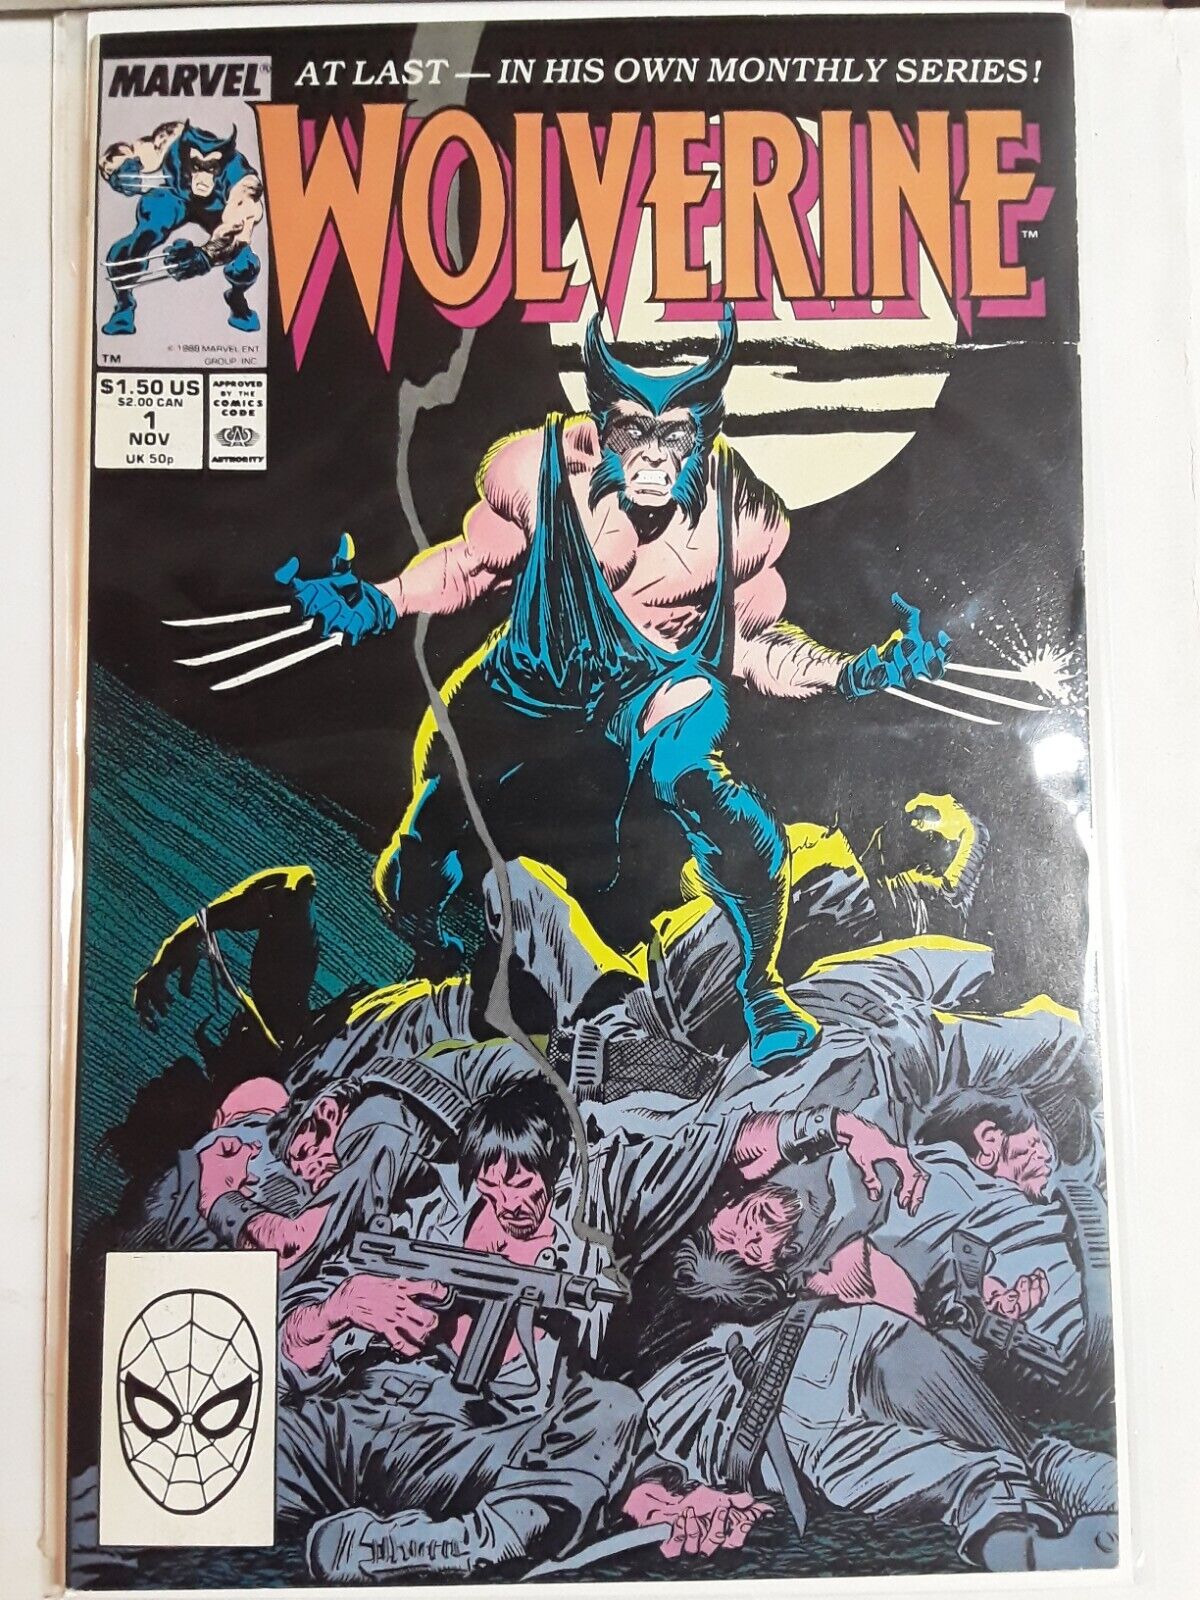 Wolverine #1 (1988 Marvel Comics) Key 1st App of Wolverine as Patch